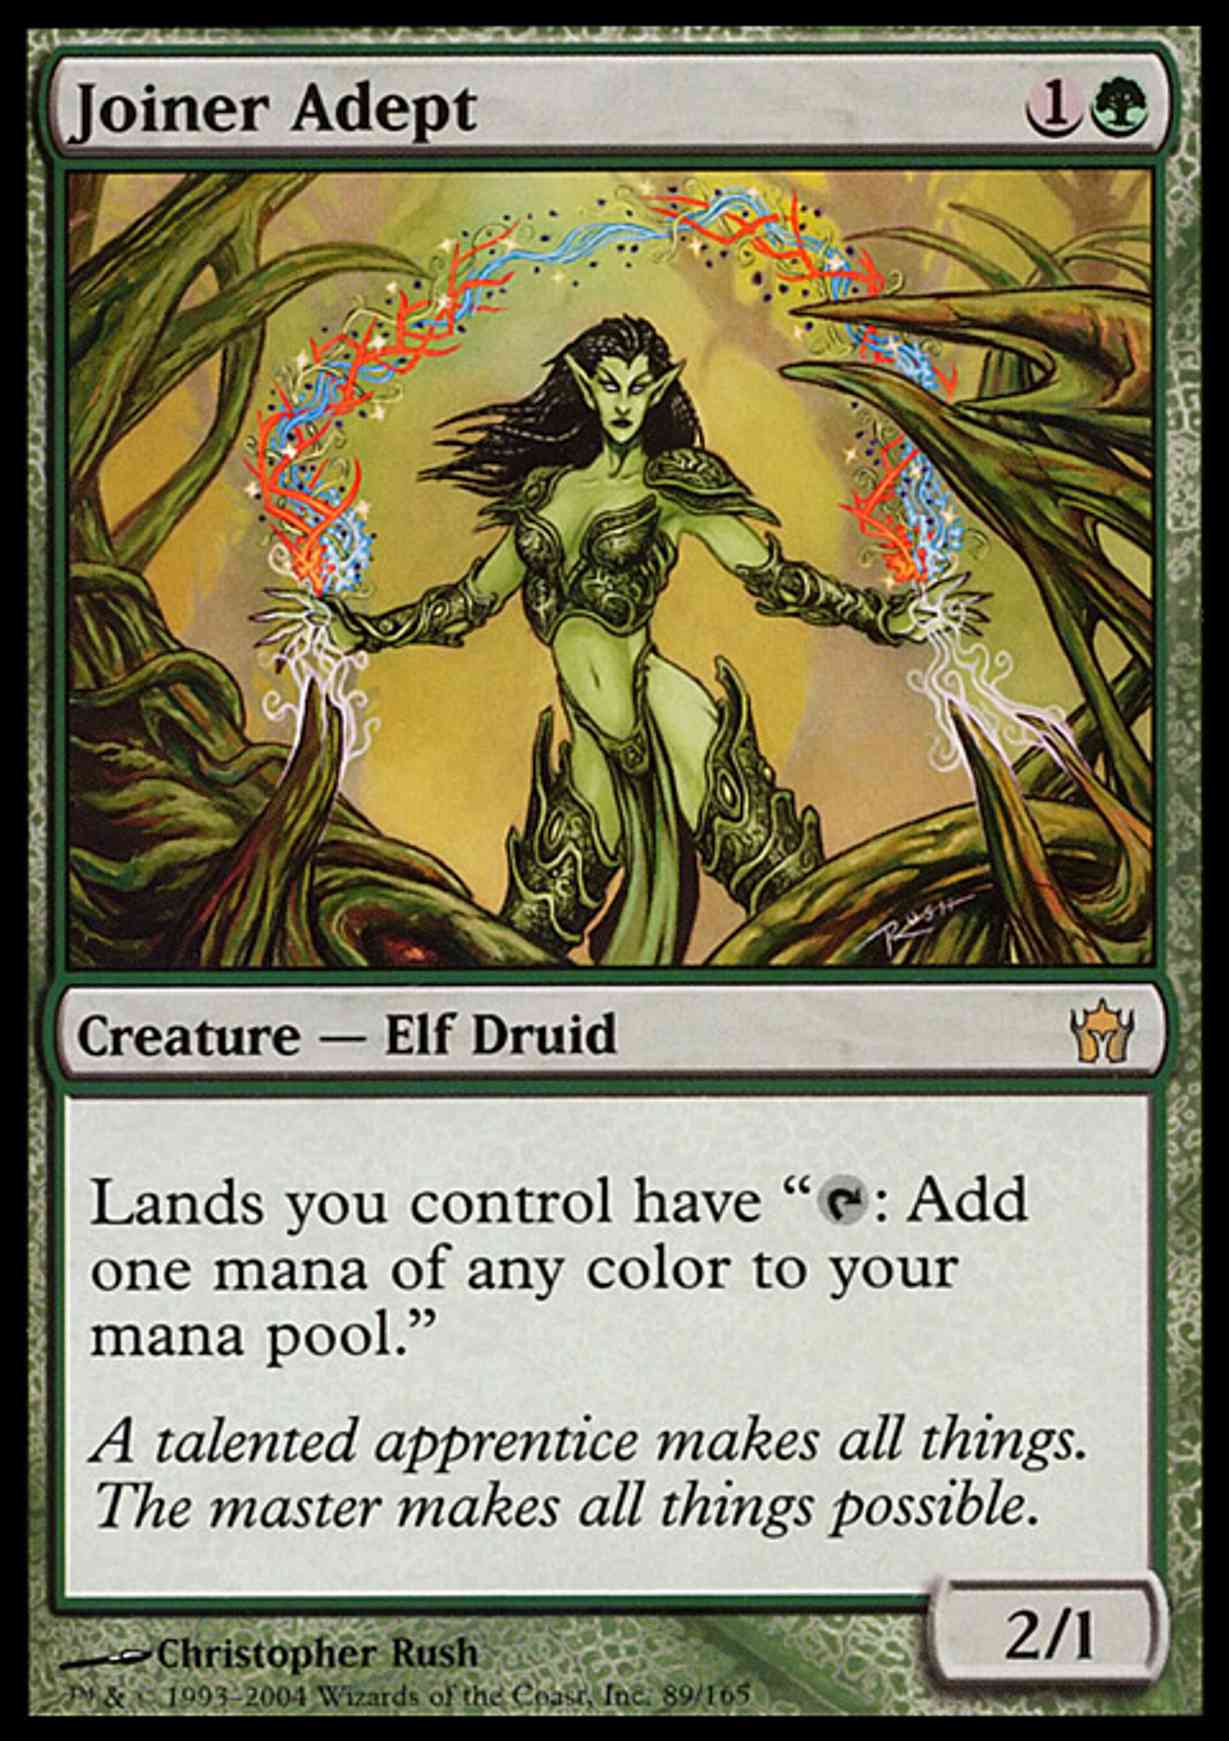 Joiner Adept magic card front